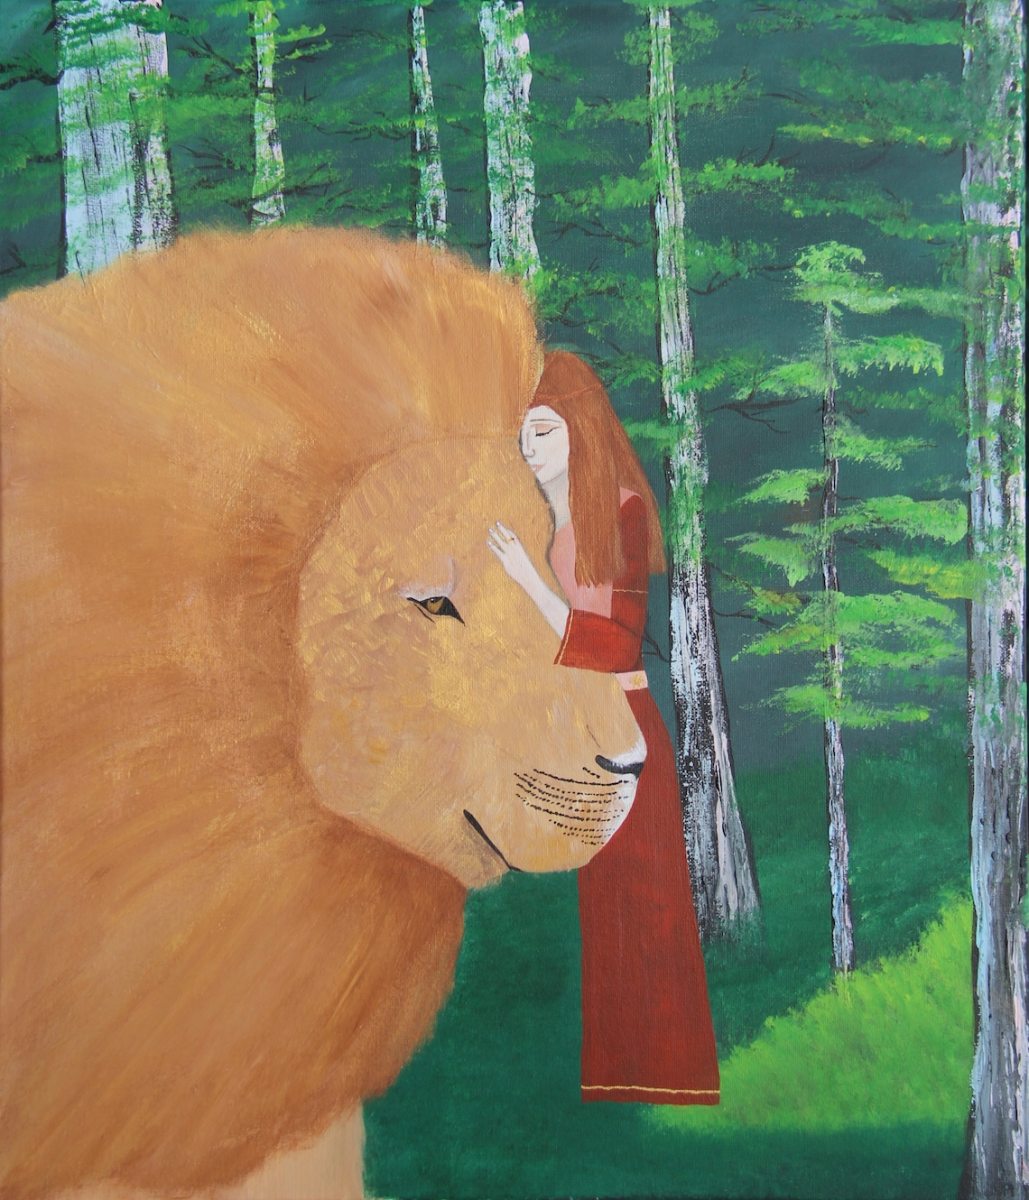 Painting addressing the endangerment of lions